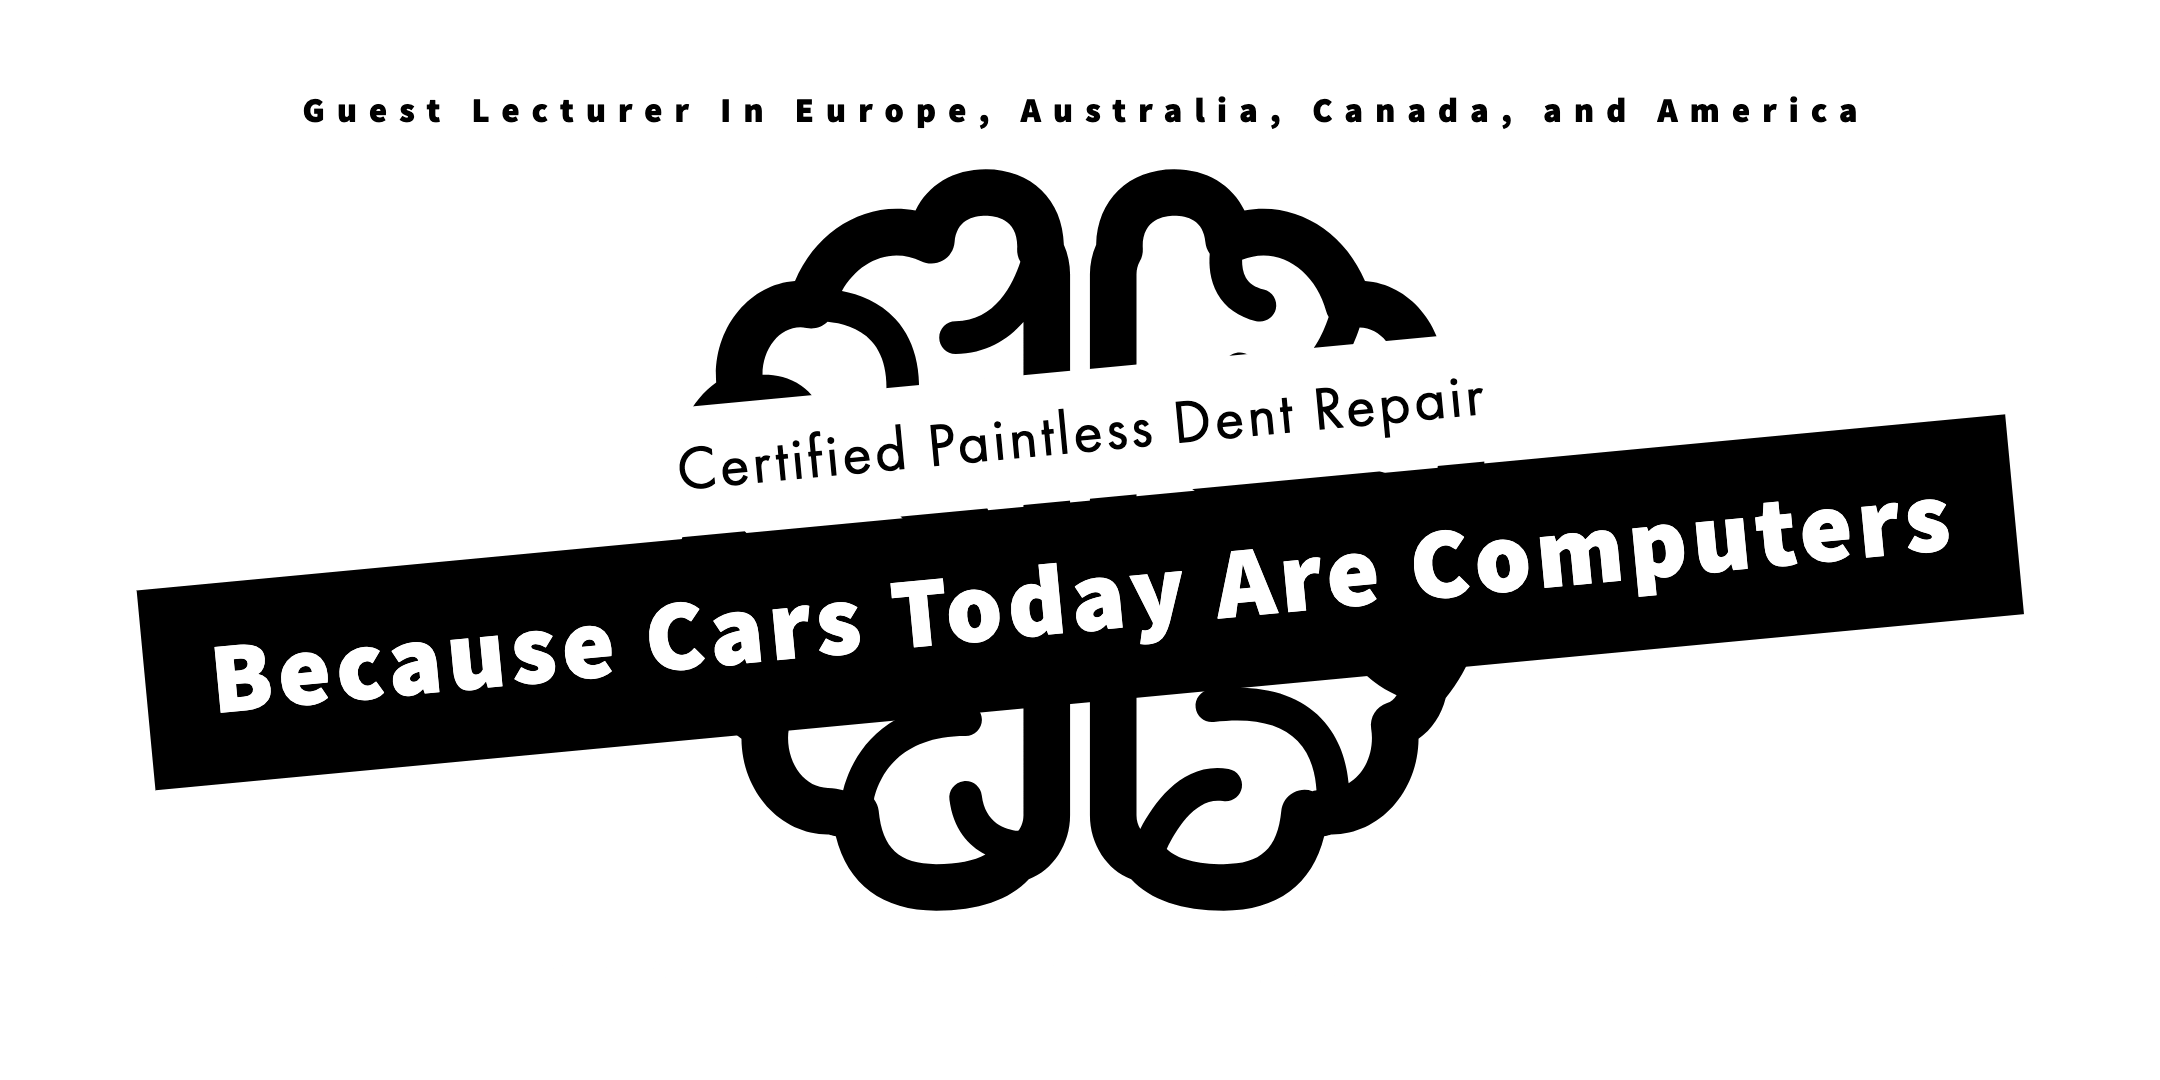 Vehicles are more like rolling computers and need to be treated with great care. We are certified in Paintless Dent Repair Serving Central Florida 